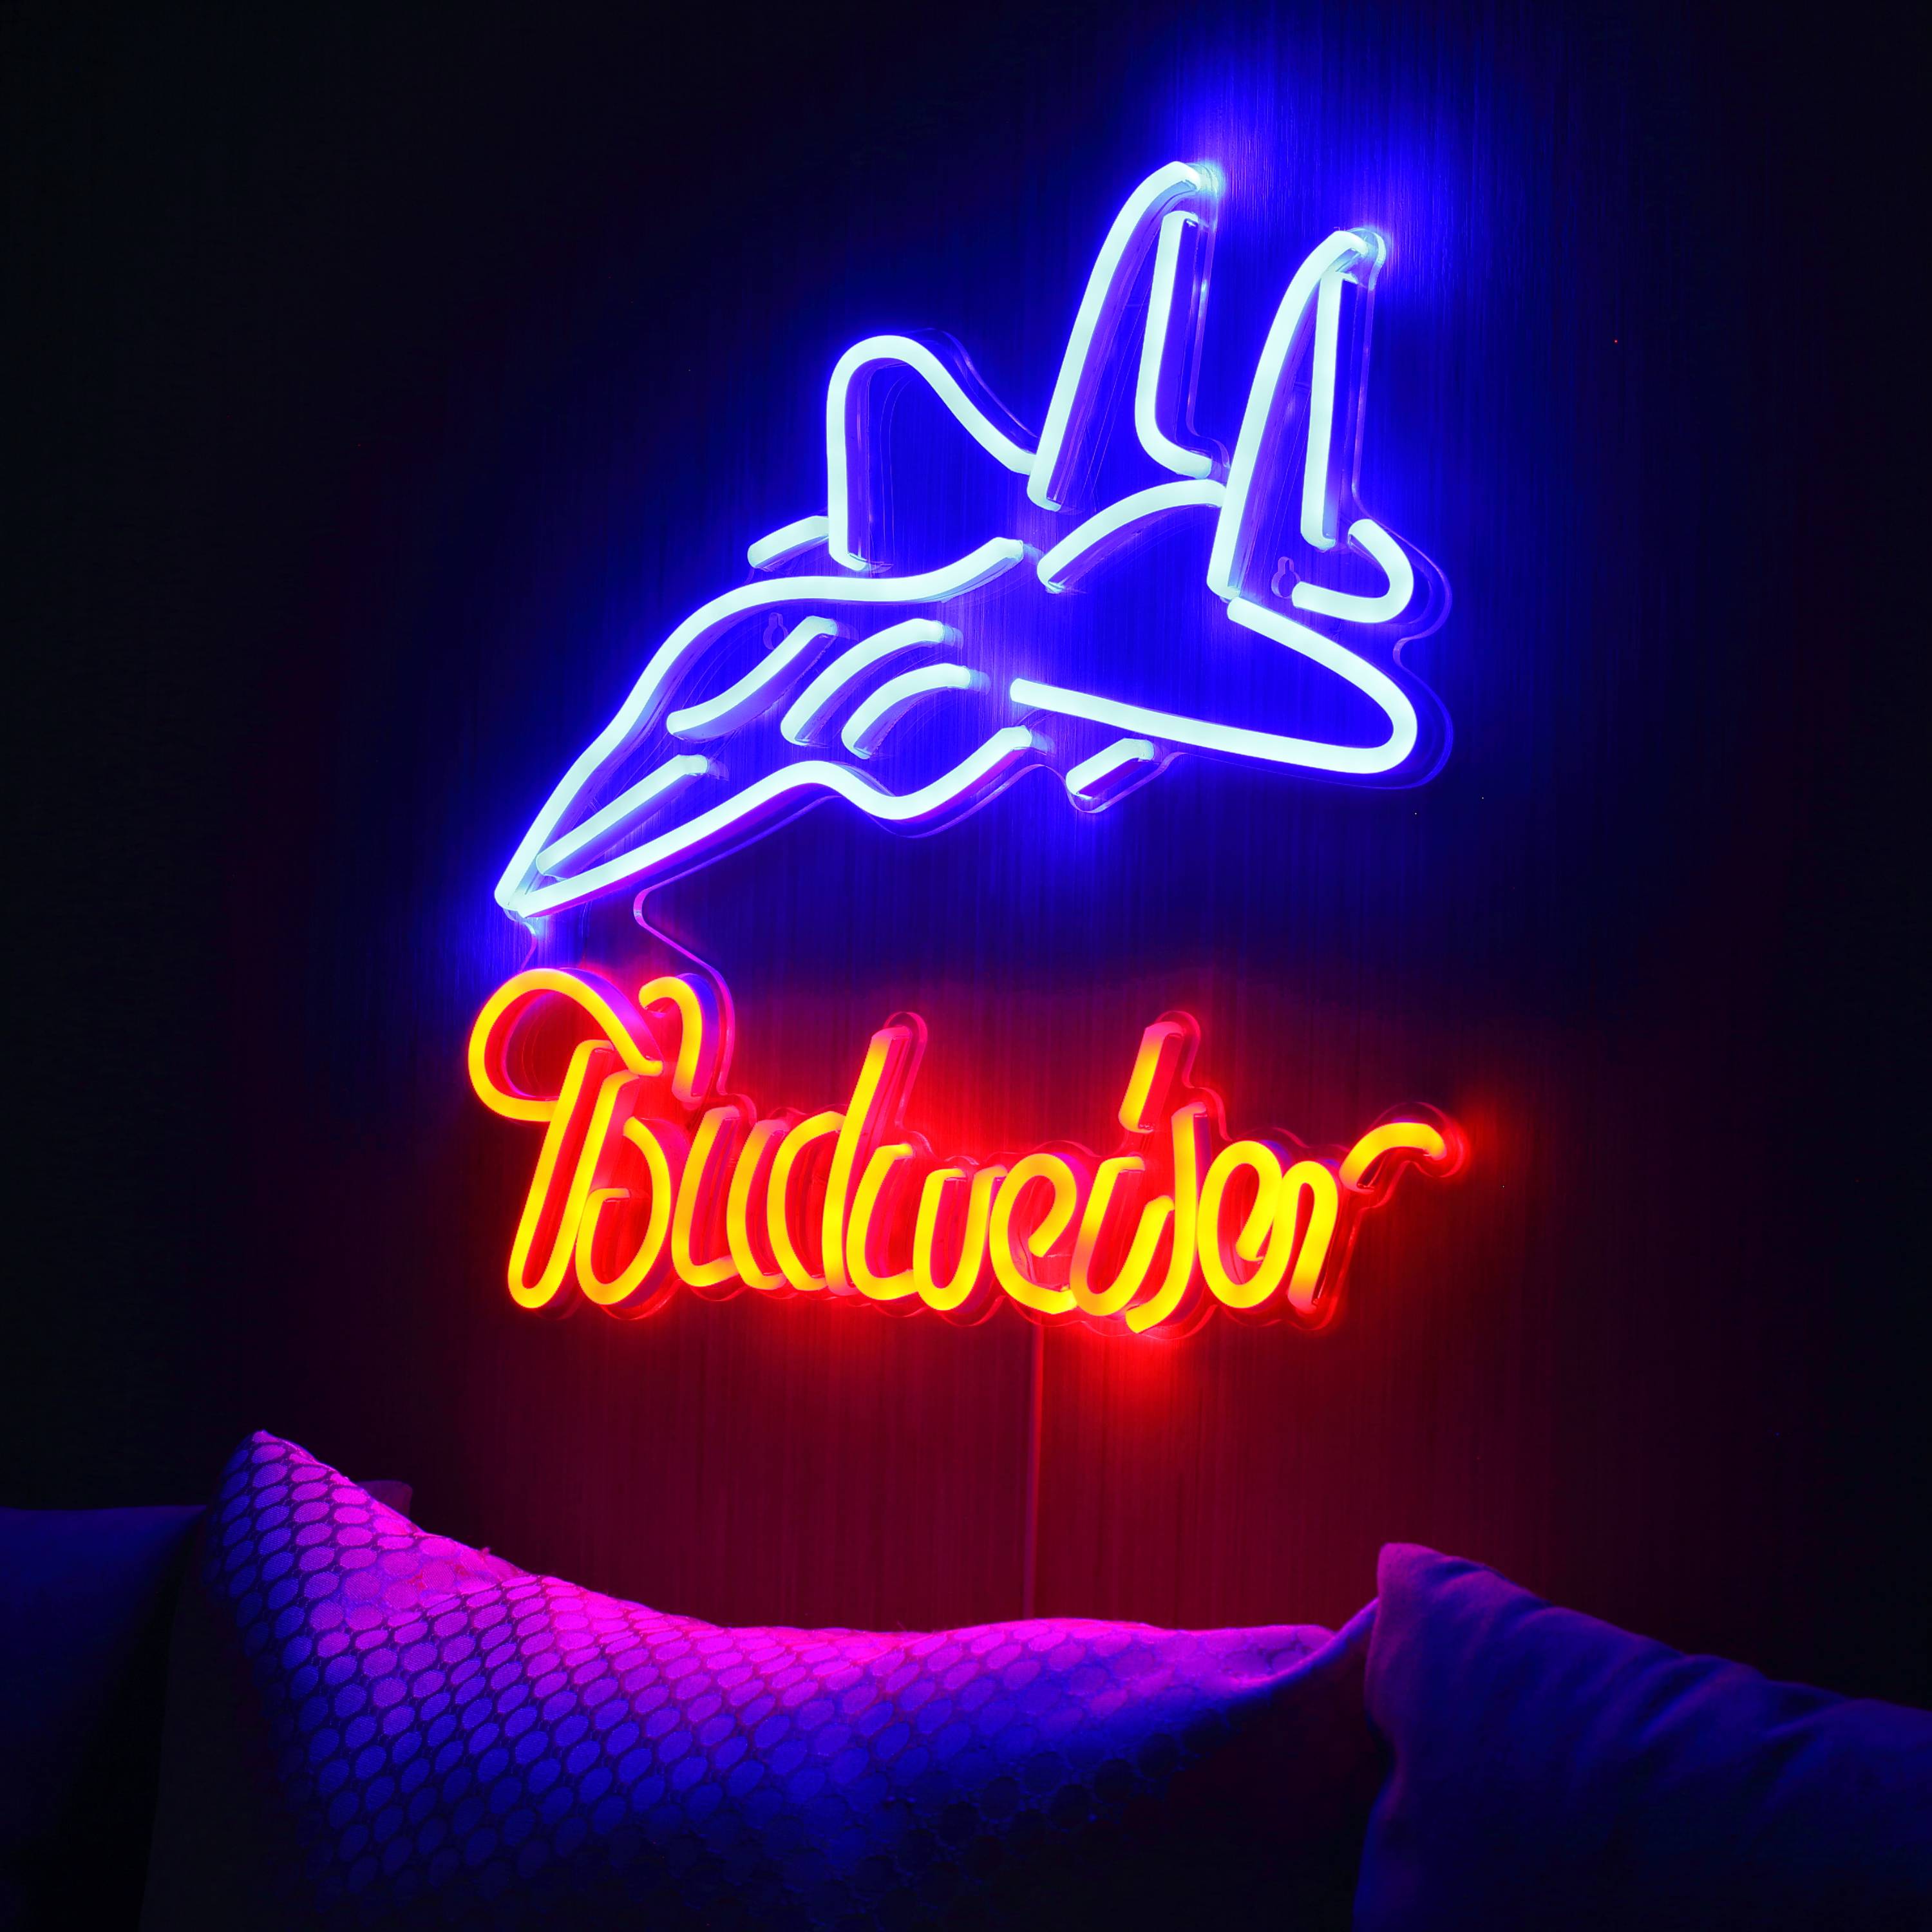 Budweiser with Jet Fighter Large Flex Neon LED Sign